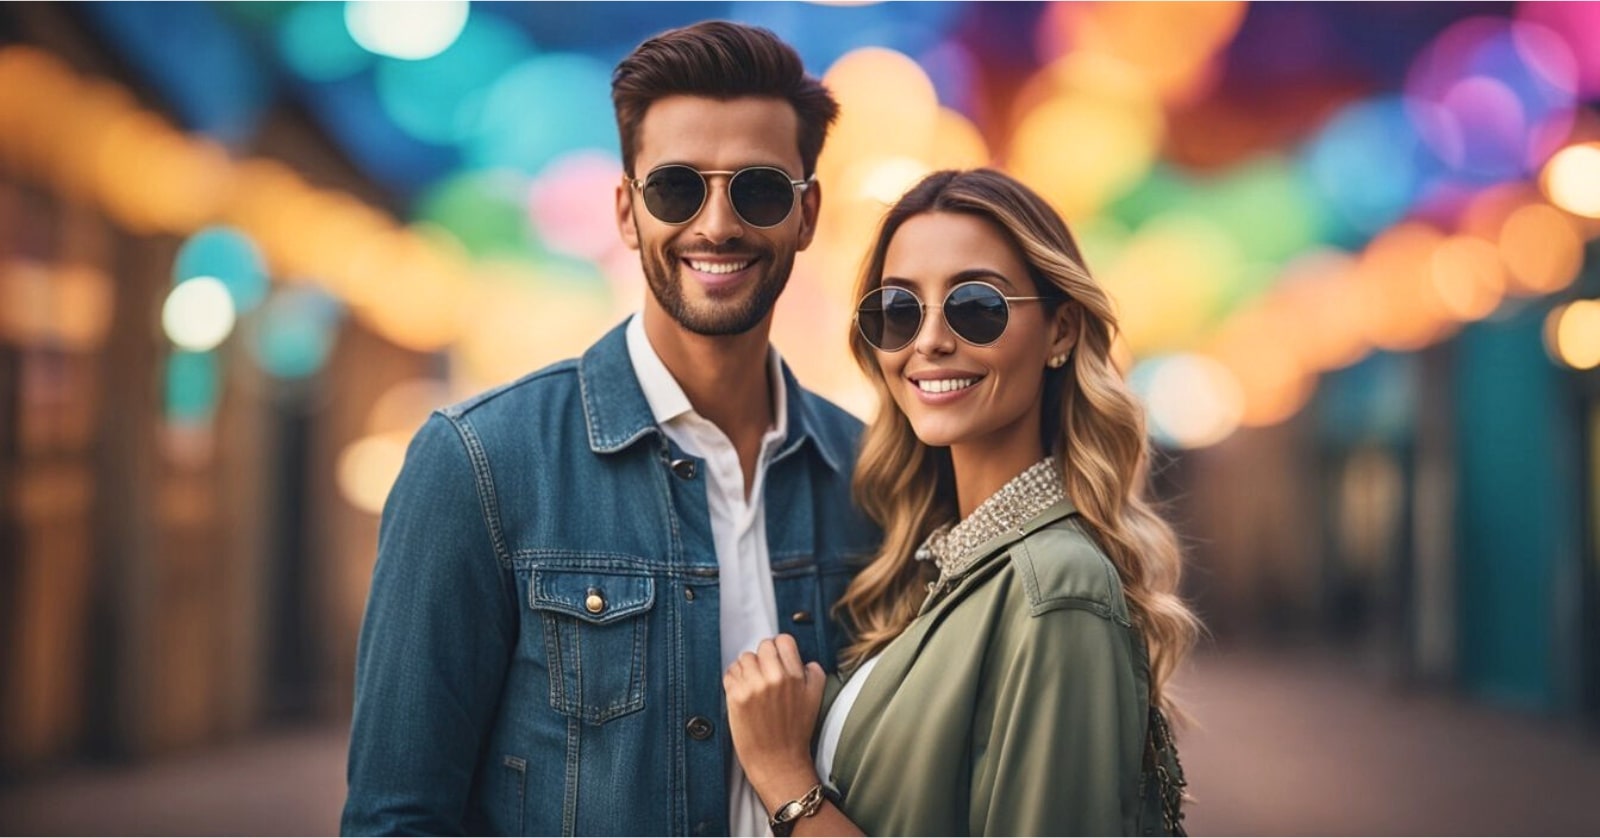 happy looking couple wearing sunglasses against a colorful street background